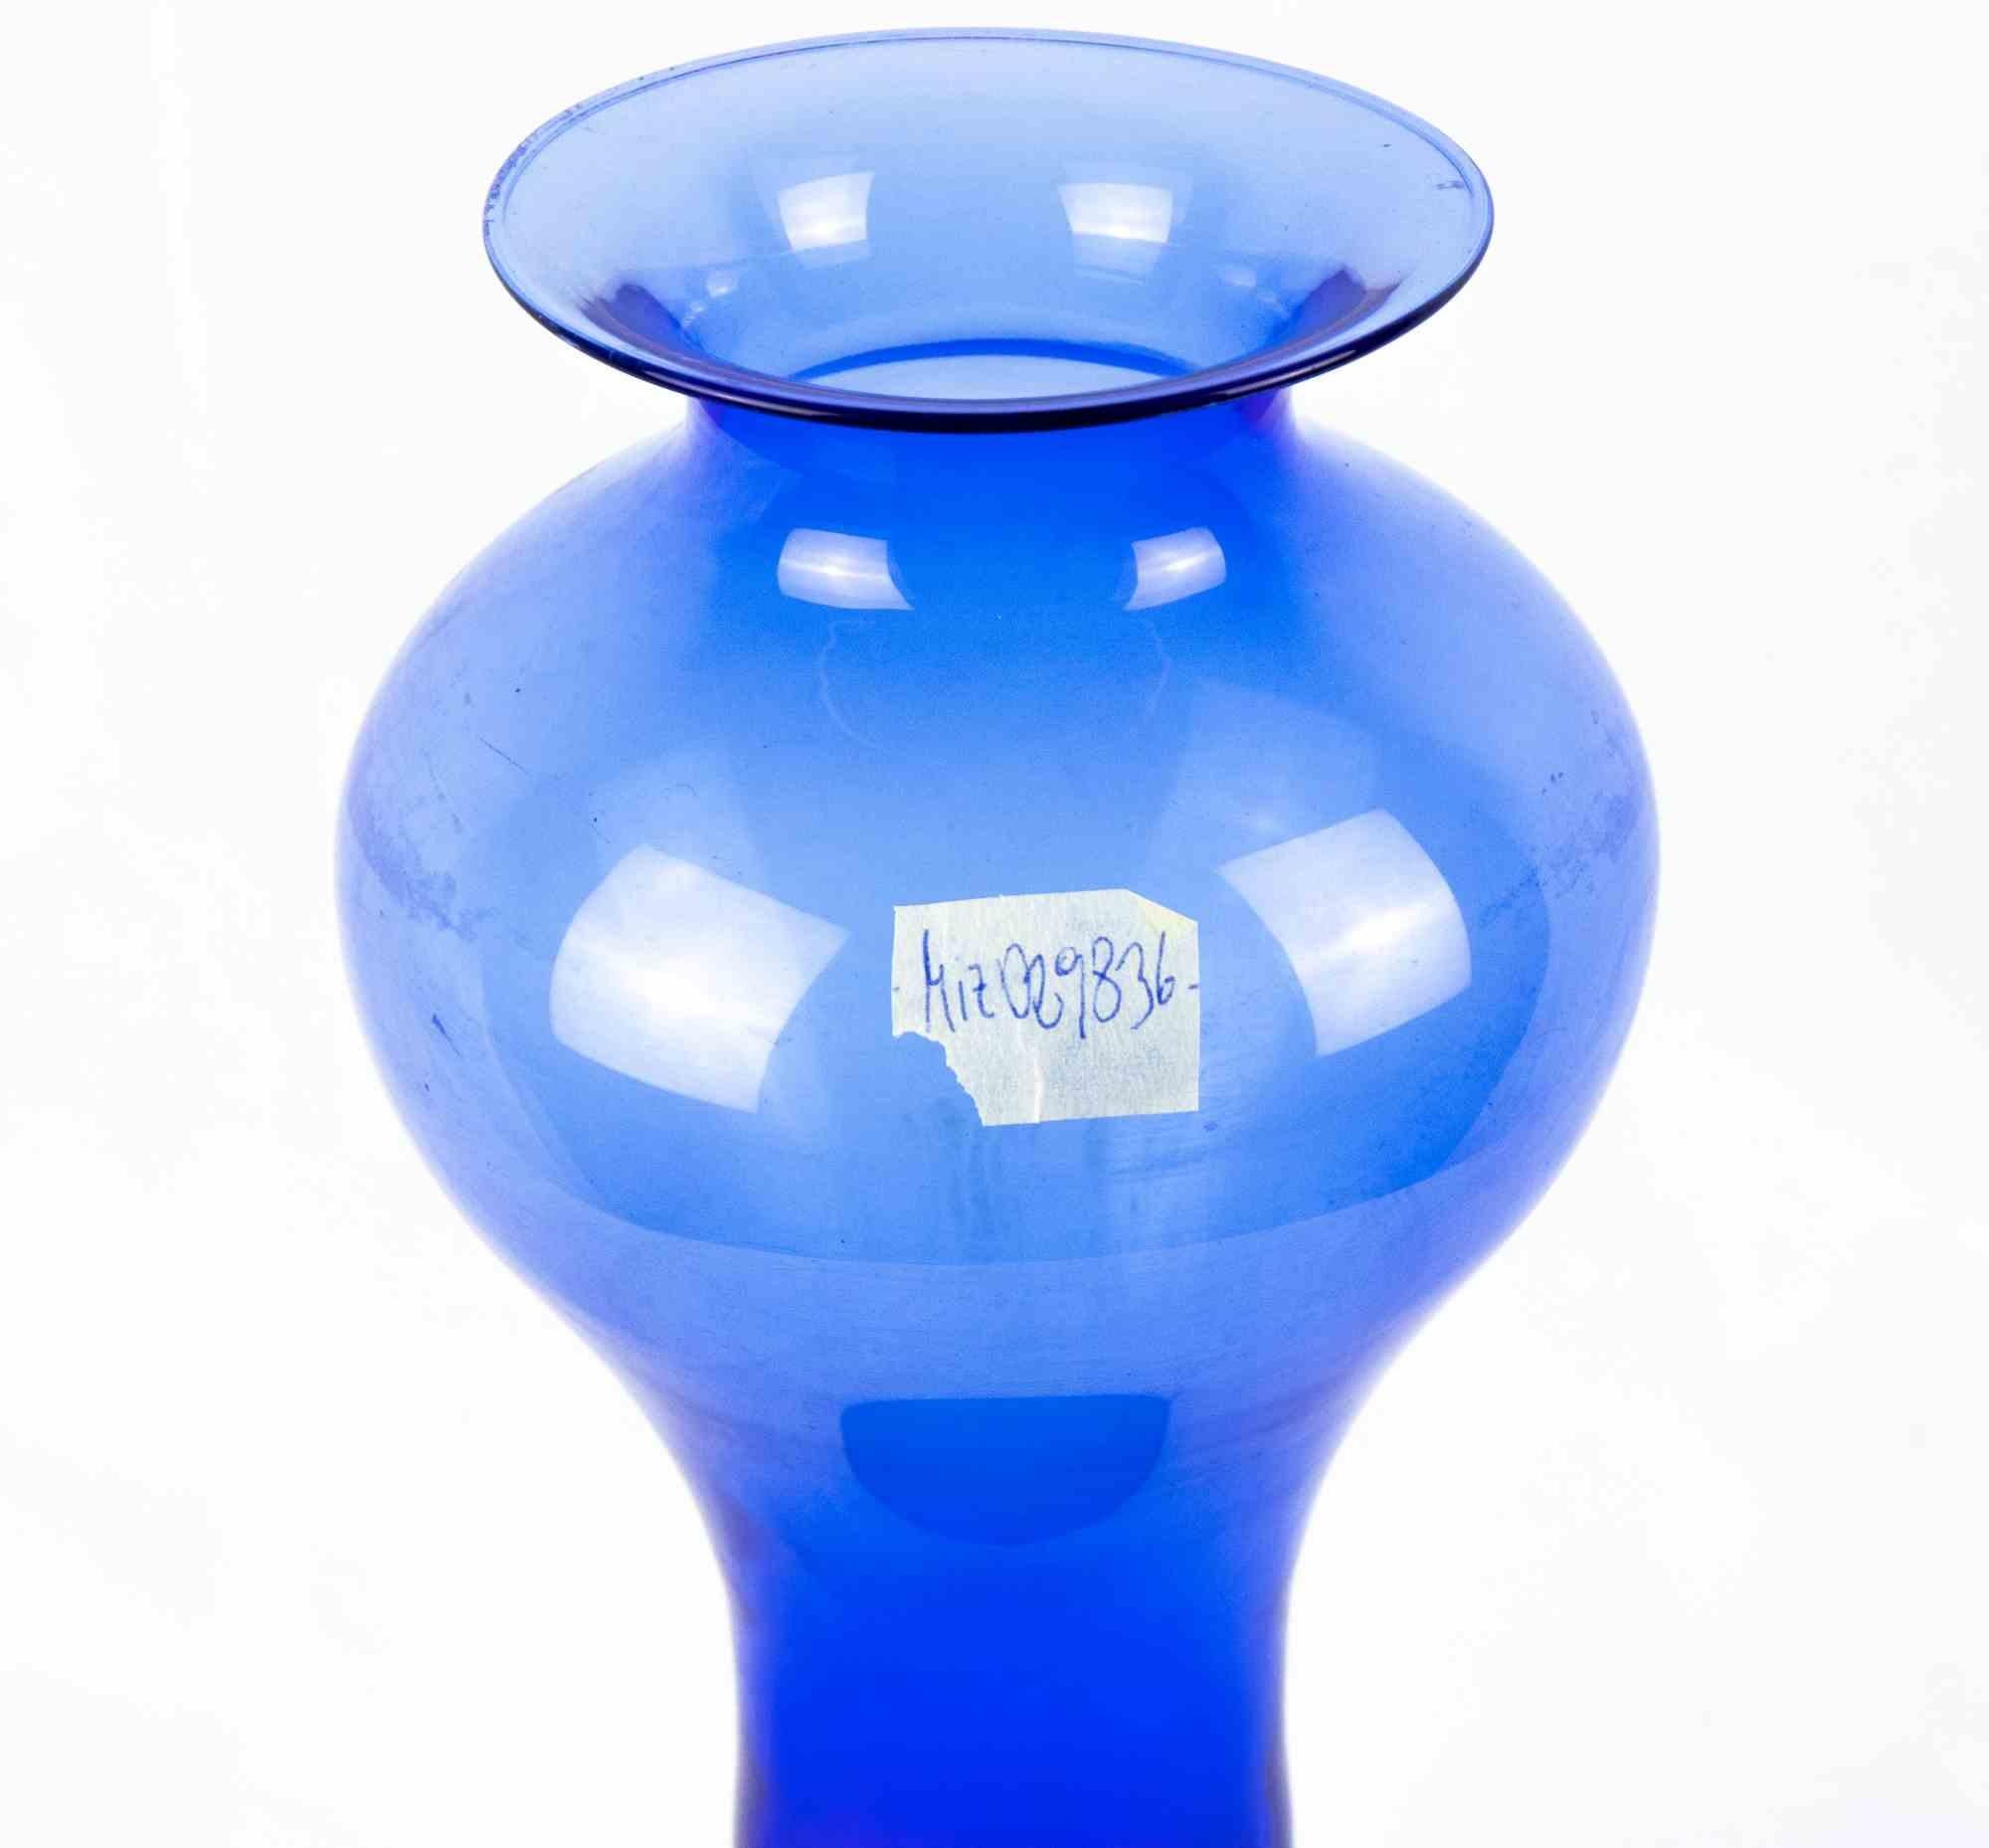 Vintage murano glass vase is a beautiful glass decorative object, realized by a Murano manufacture during the 1970s. 

This contemporary vase is a very special and unique piece to add to your collection.

It is made of hand made art glass in a